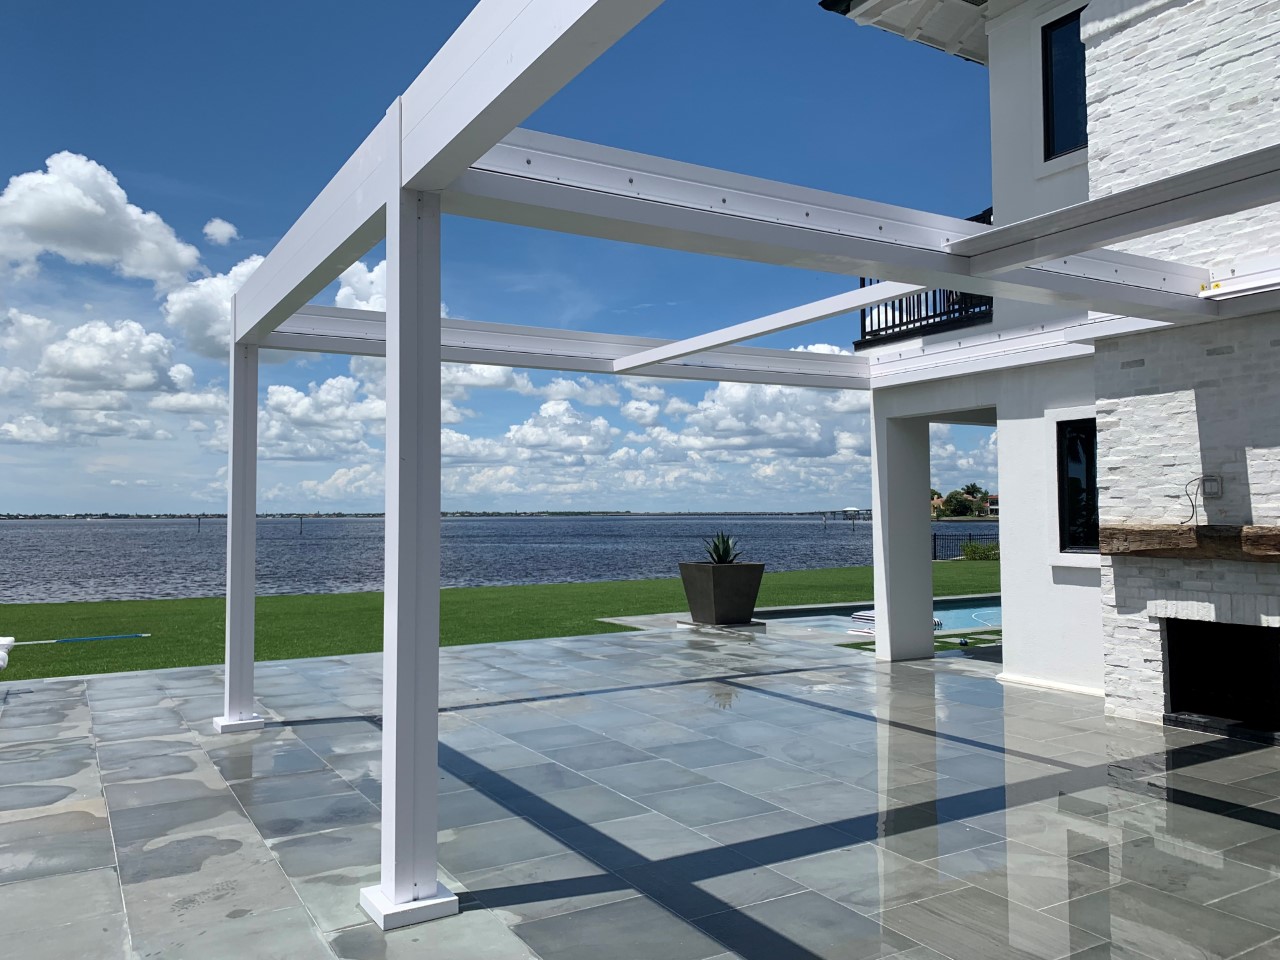 pergola structure with fan beam